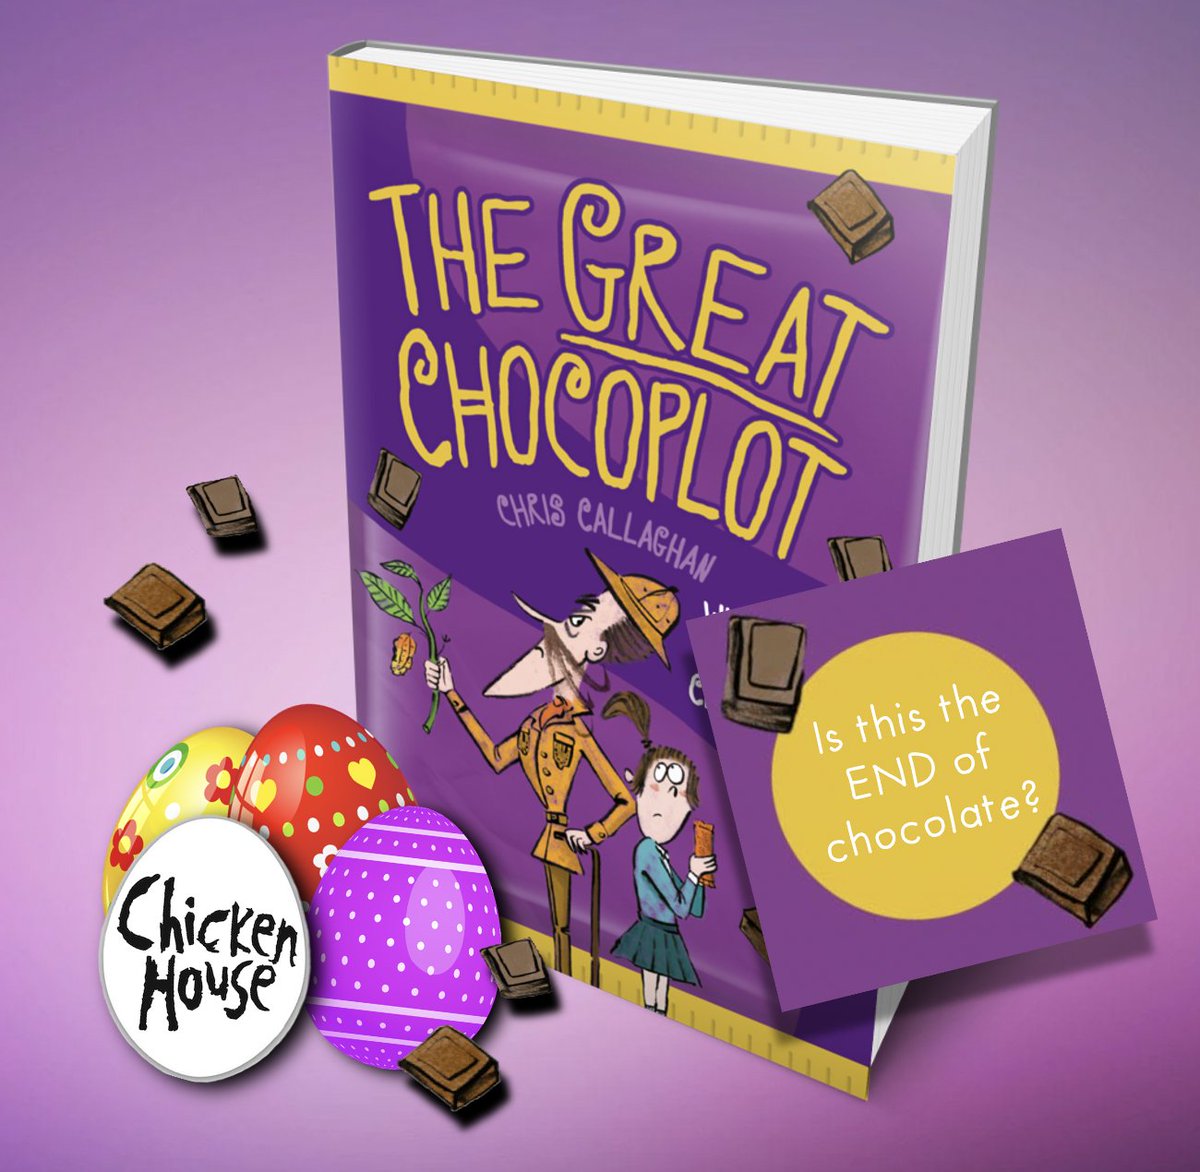 Some chocolate eggs are reportedly 50% more eggspensive (not sorry) this year. May I suggest using that dosh on a chocolatey book instead. If only I could think of one ...